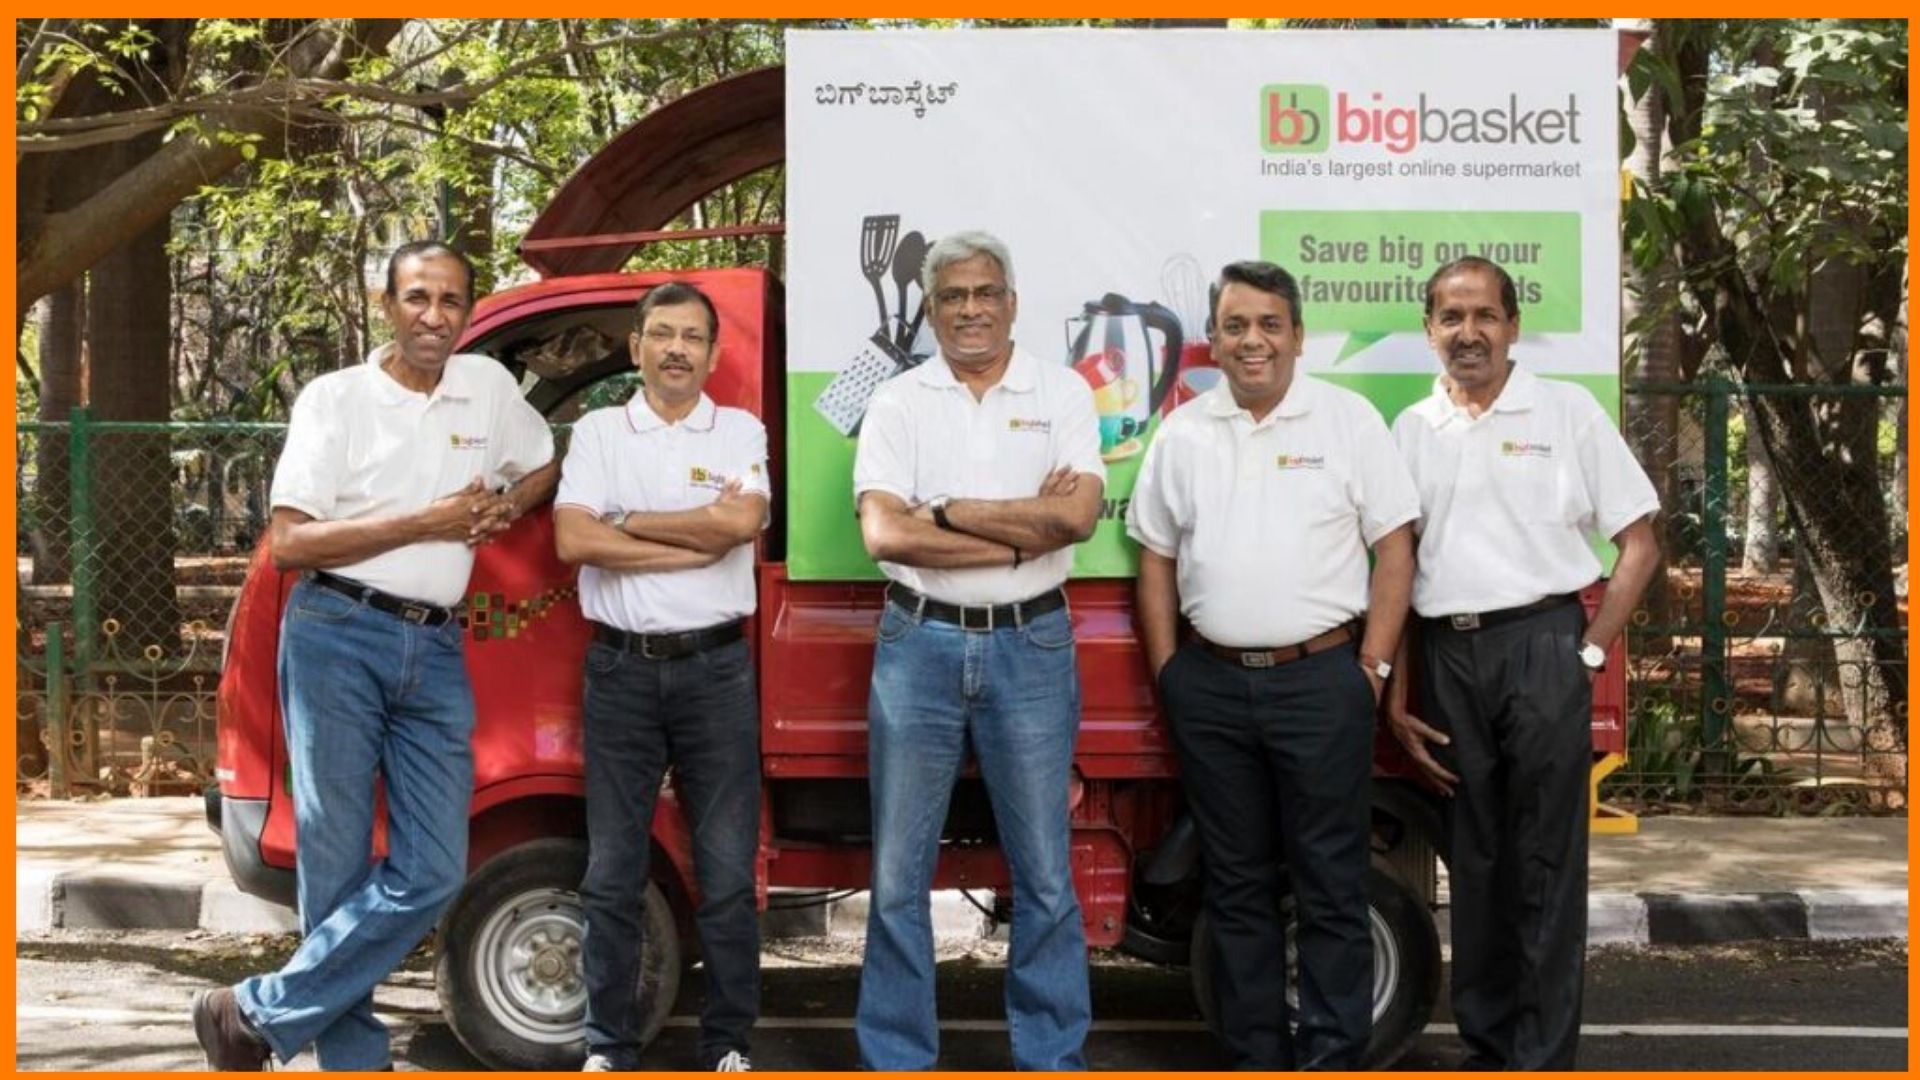 BigBasket - Success Story of India's Largest Online Grocer